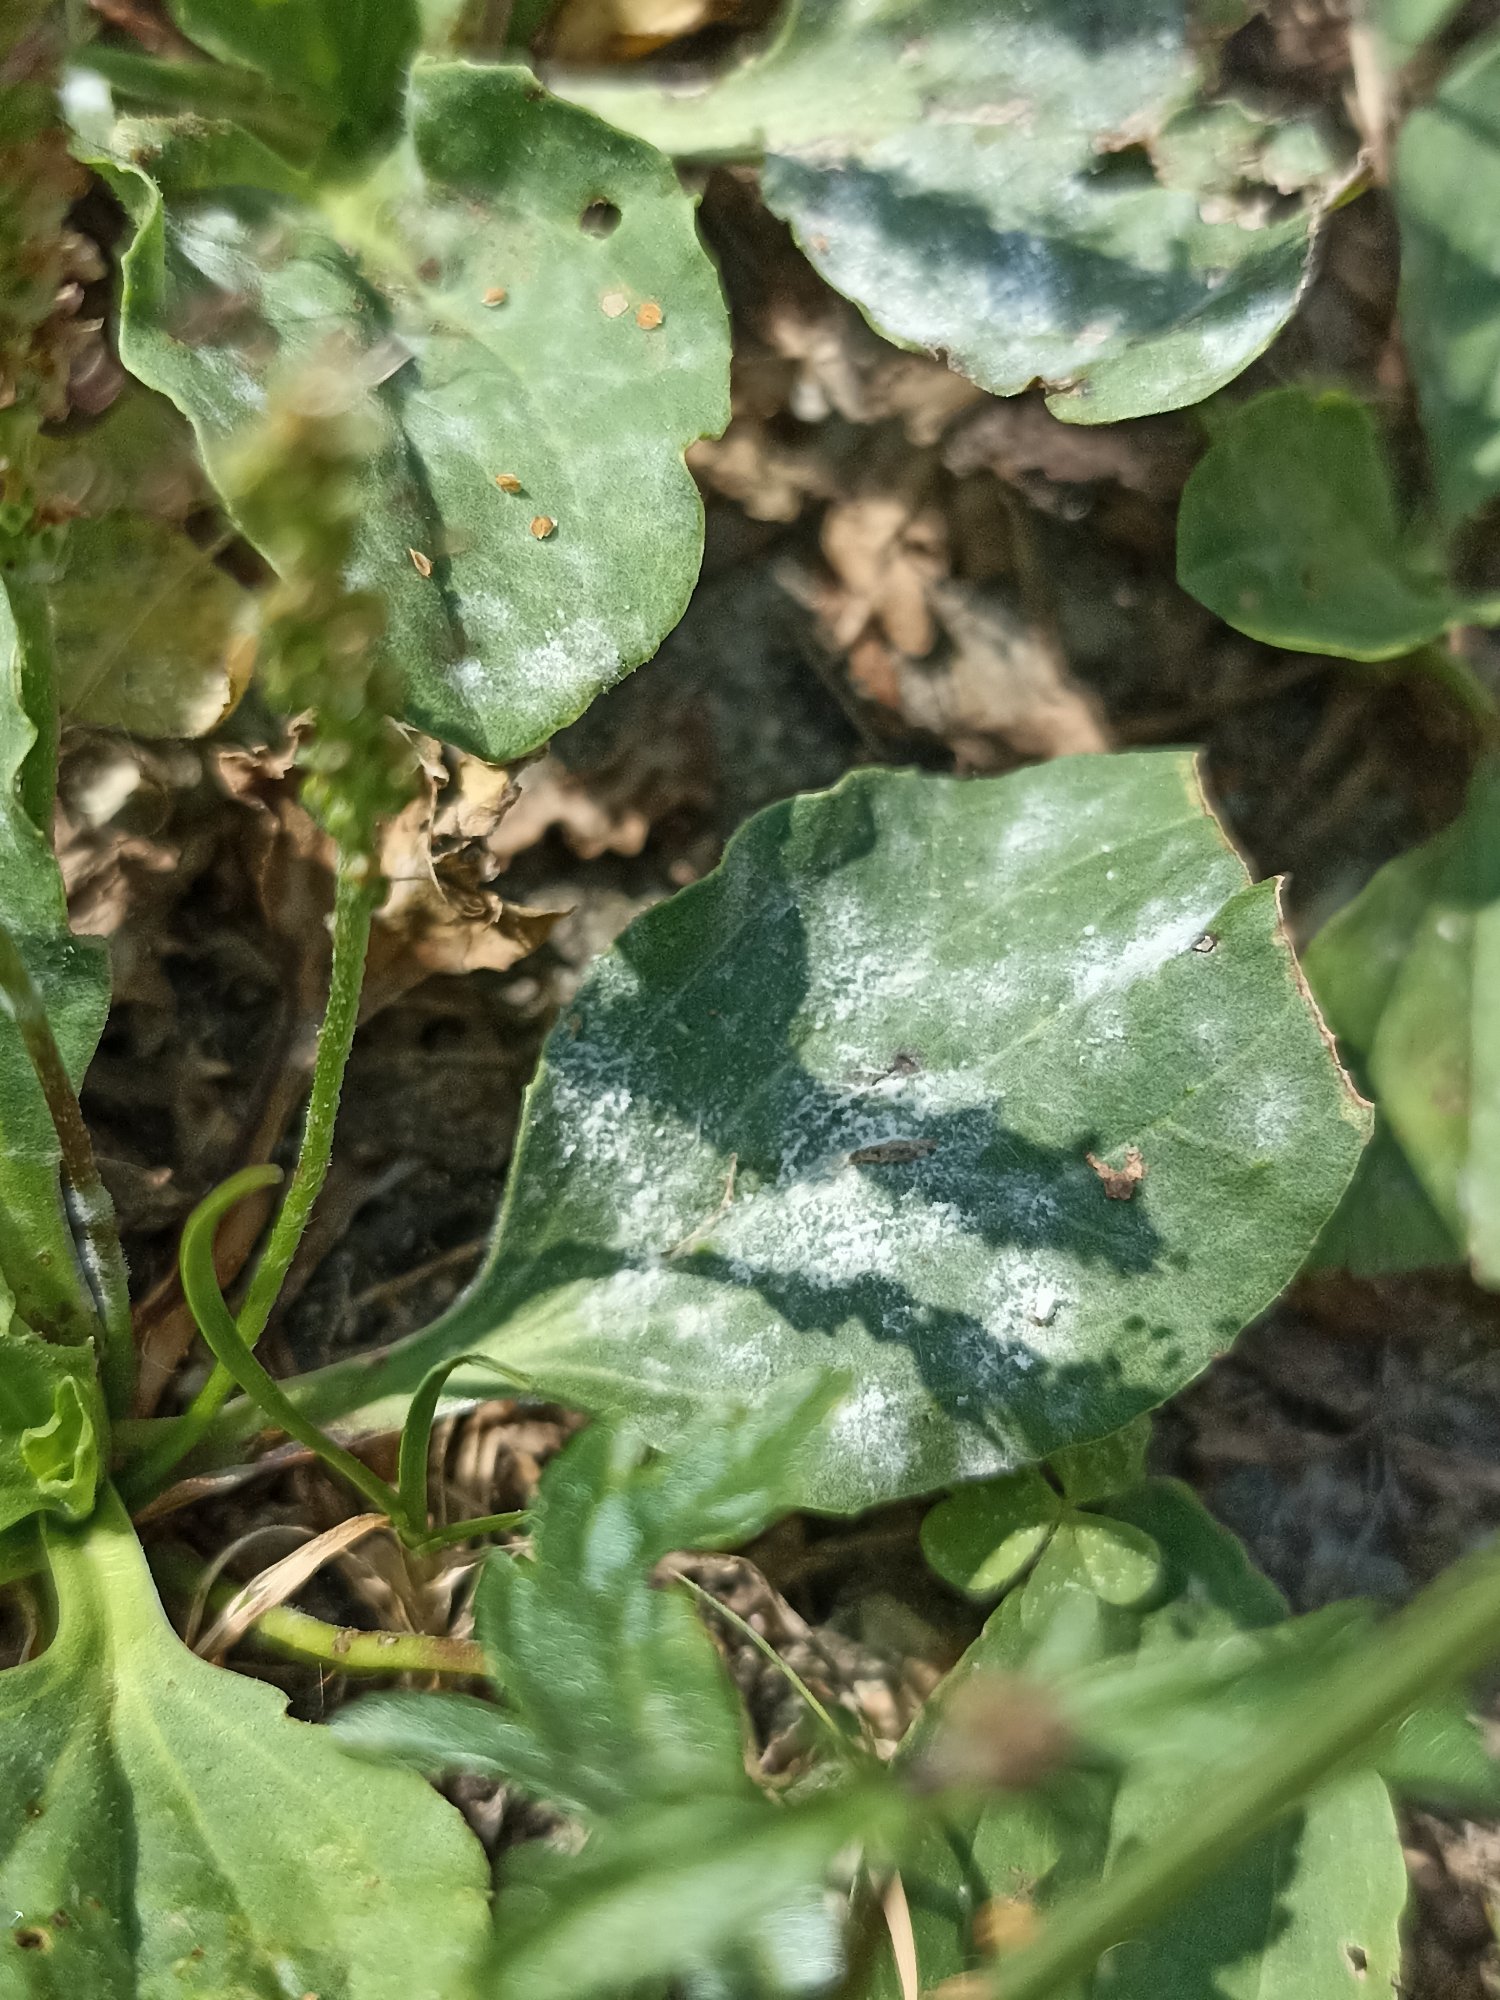 Does this powdery mildew seem to you badly white